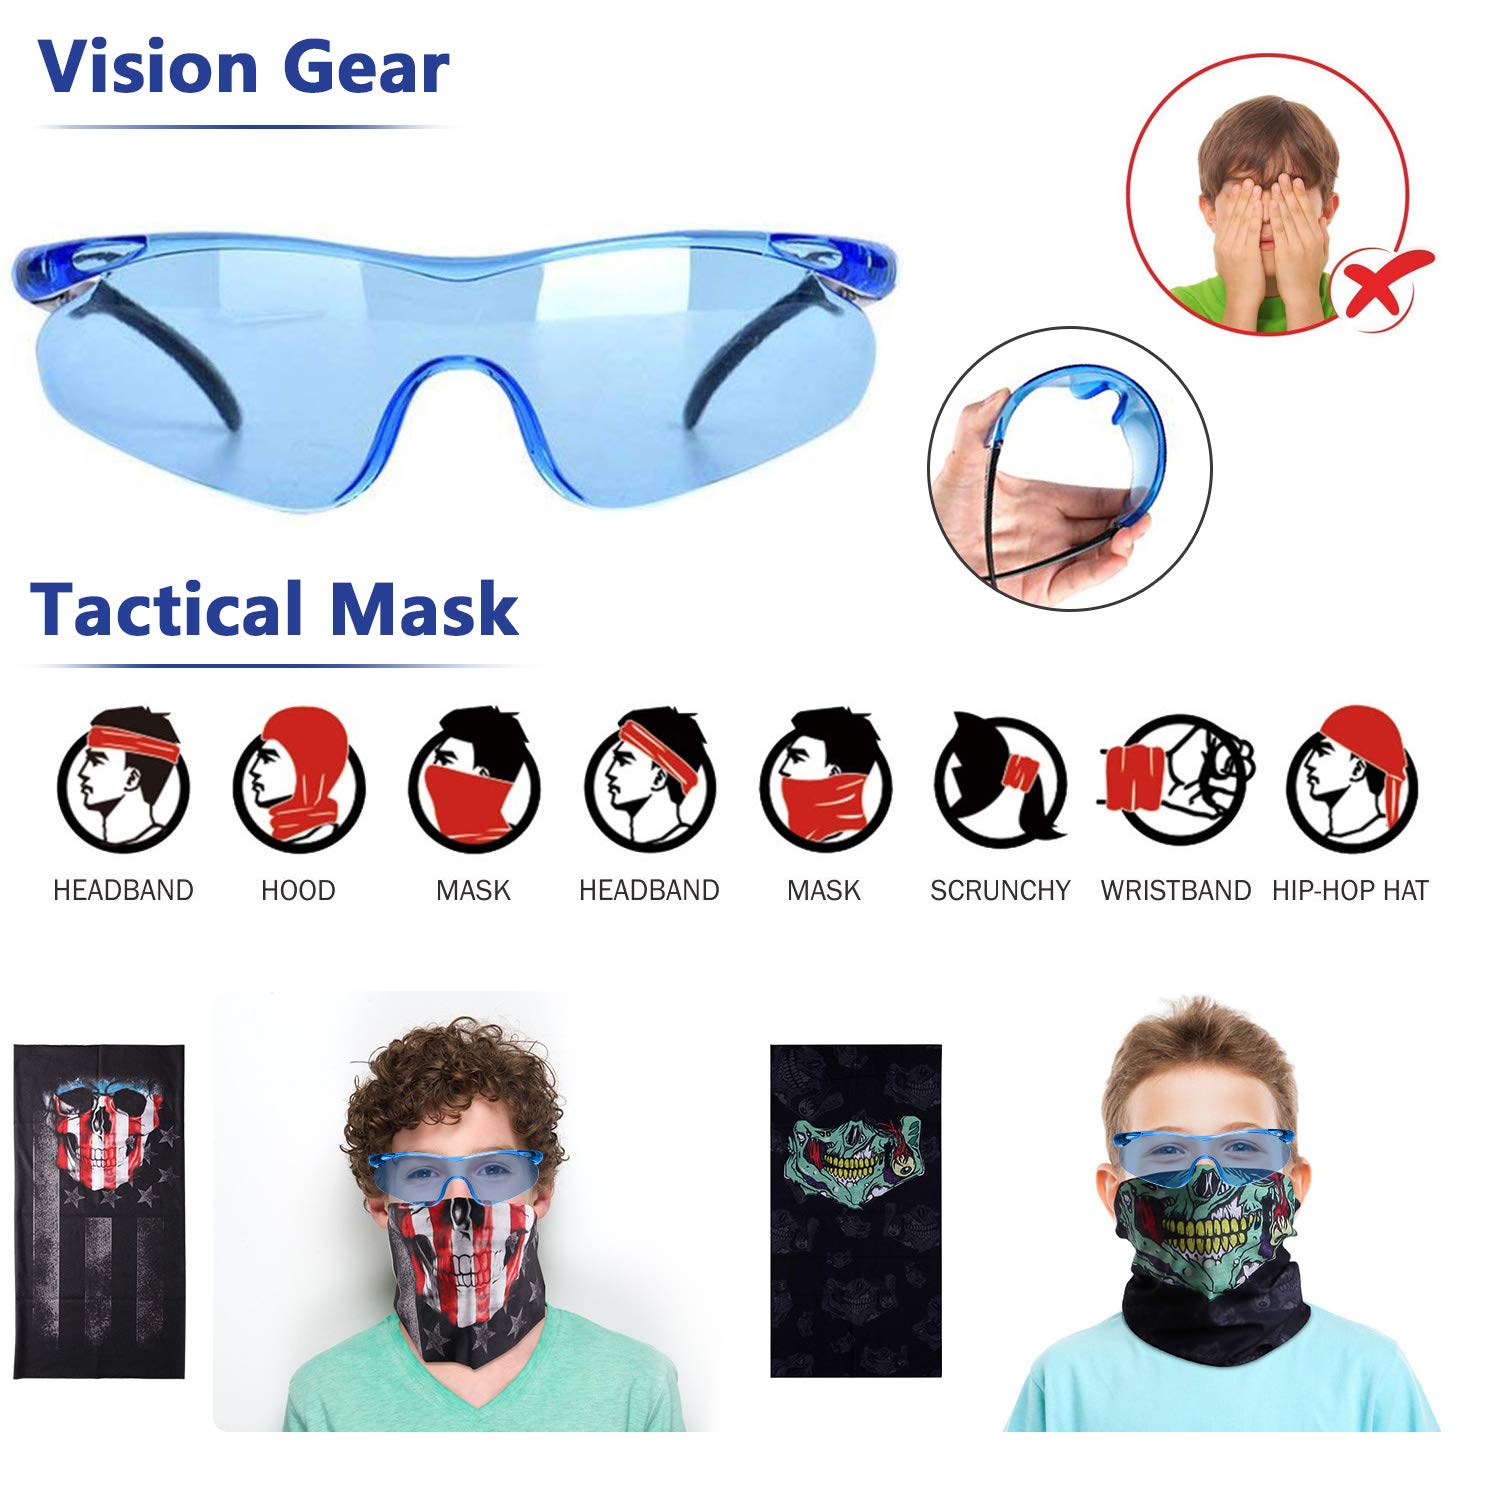 2 Pack Kids Tactical Vest Kit for Nerf Guns Game N-Strike Elite Series Wars with Refill Darts, Reload Clips, Dart Pouch, Tactical Mask, Wrist Band and Protective Glasses for Boys ,Girls